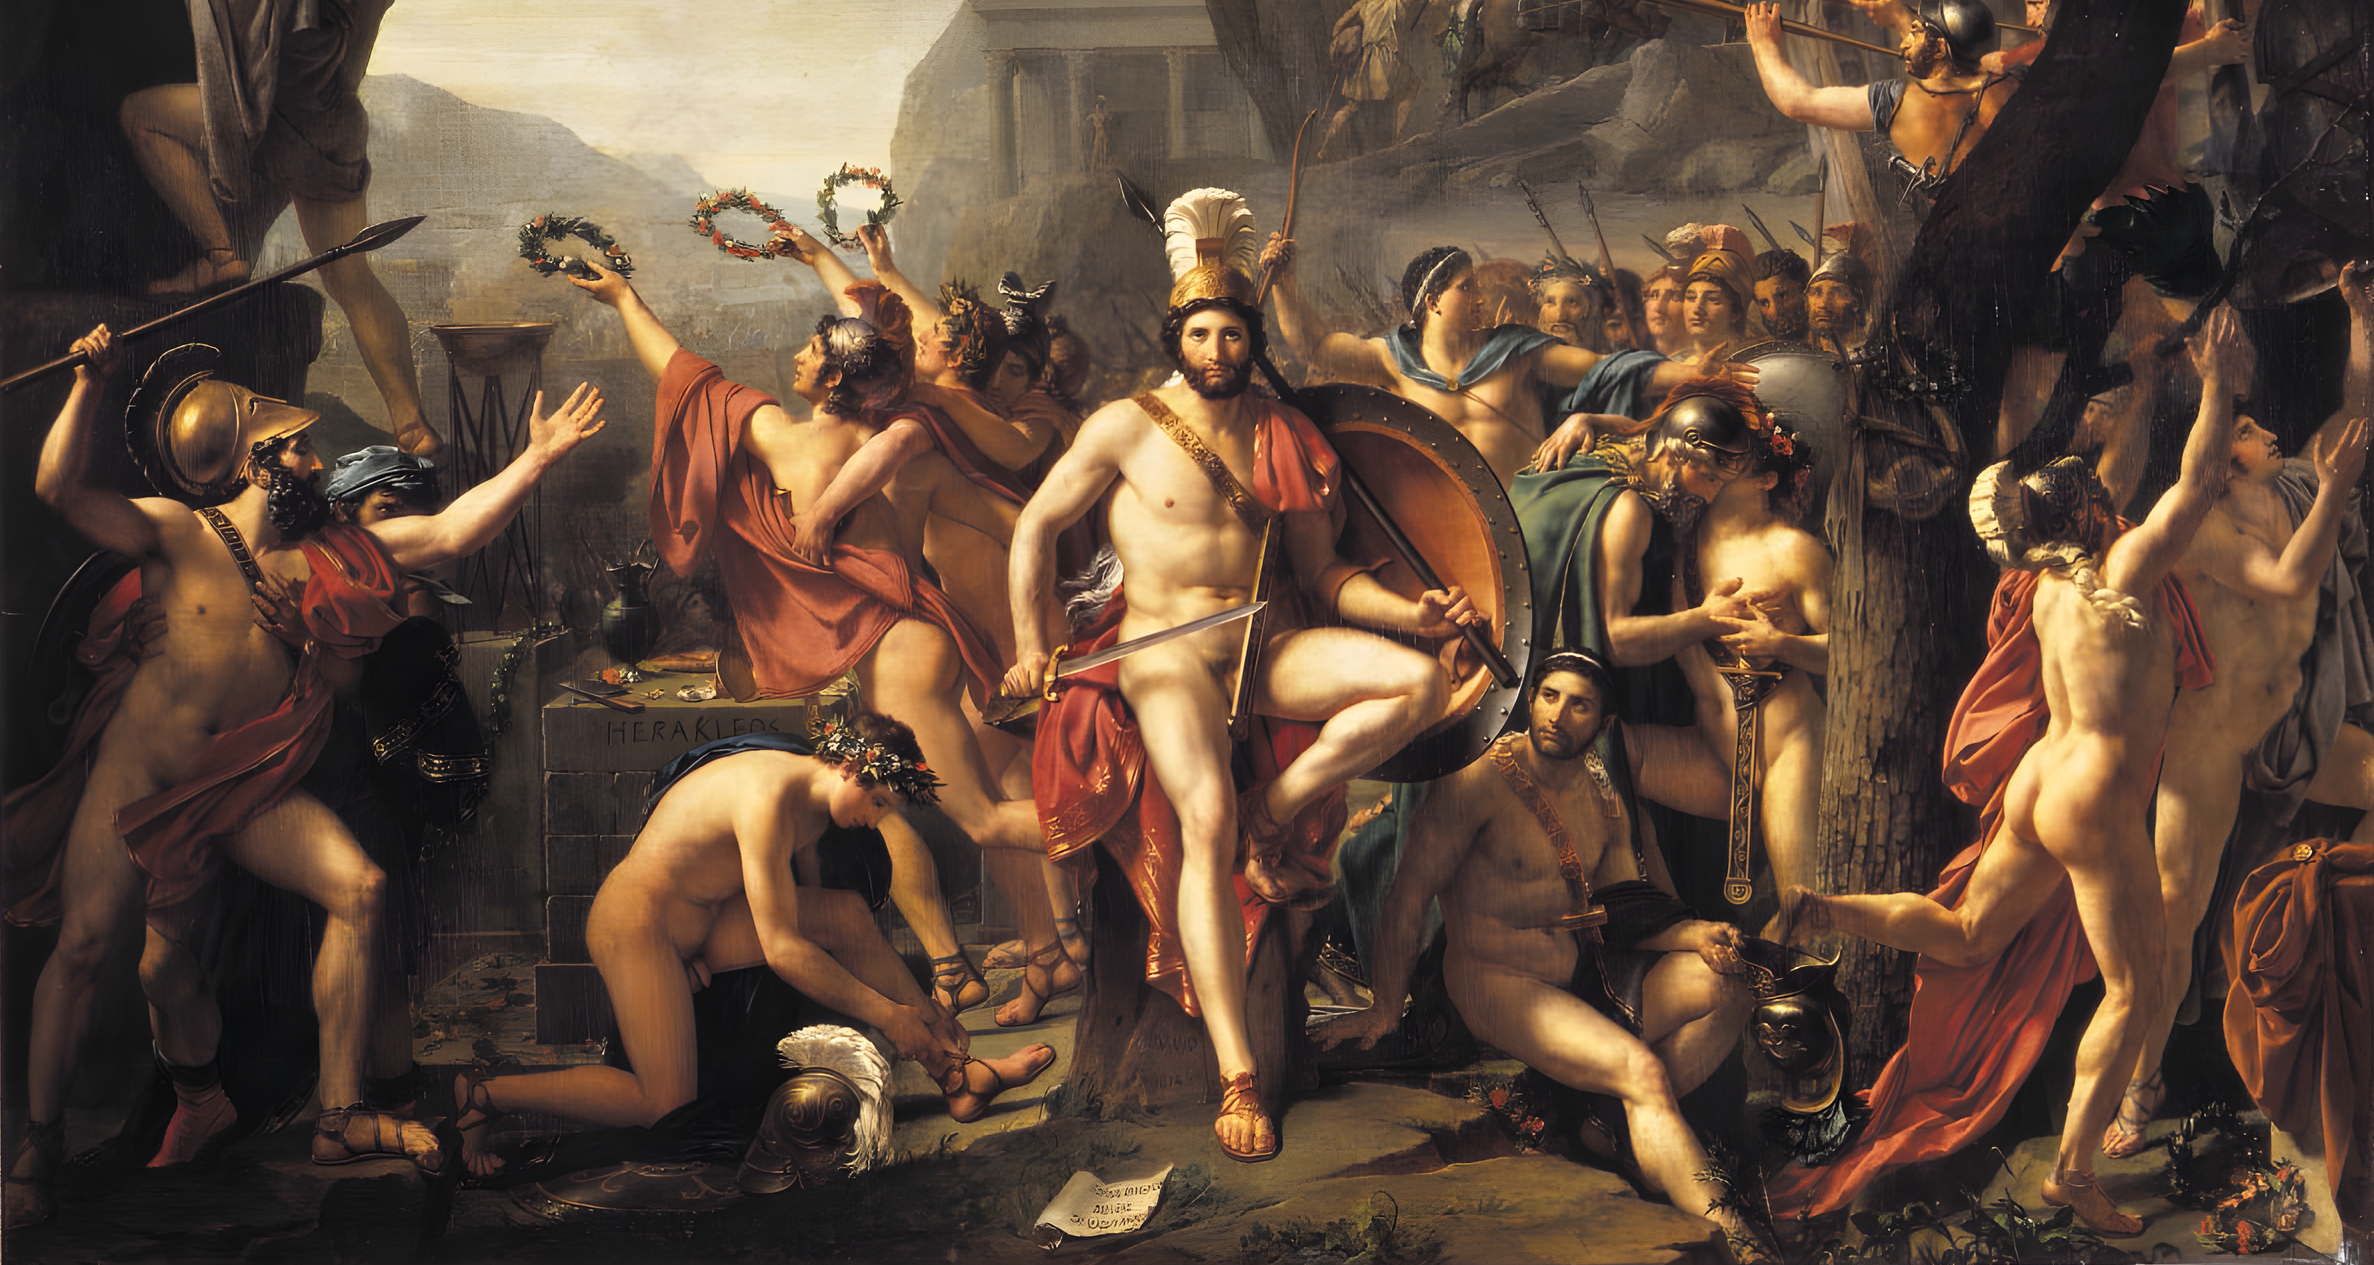 King Leonidas marched from Sparta to defend the narrow pass at Thermopylae against the gargantuan Persian army. He and his men lost their lives in the process. Jacques Louis David painted this highly romantic scene in 1814.